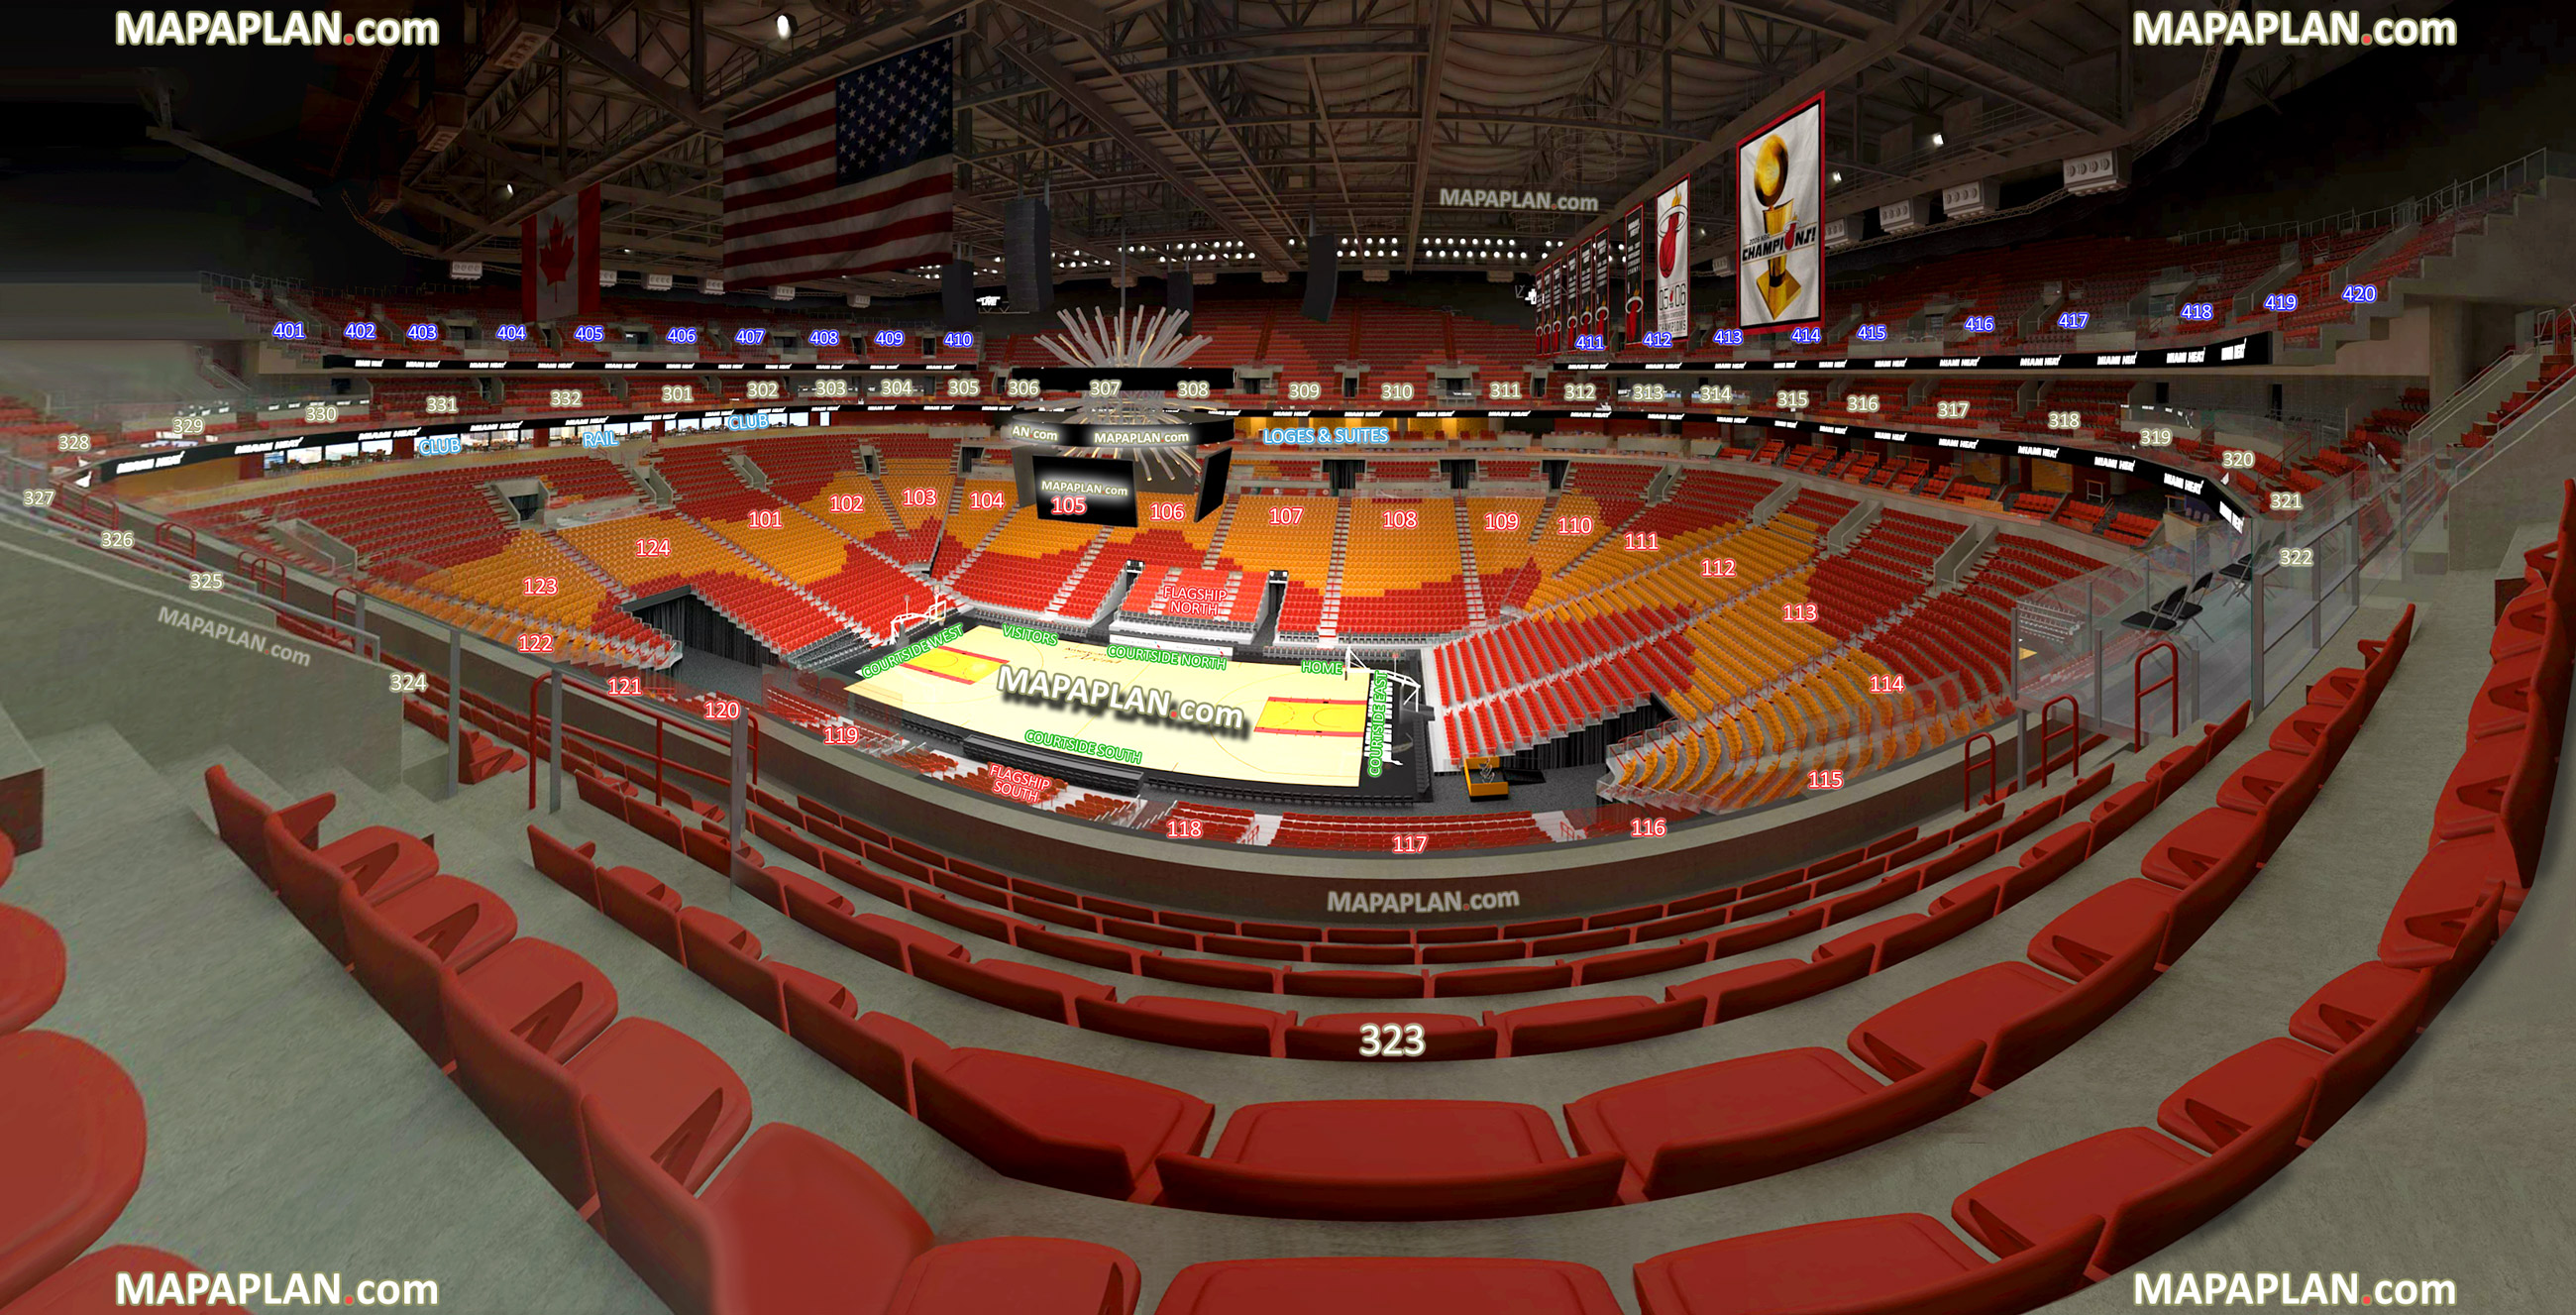 miami heat arena seating chart with seat numbers - marta